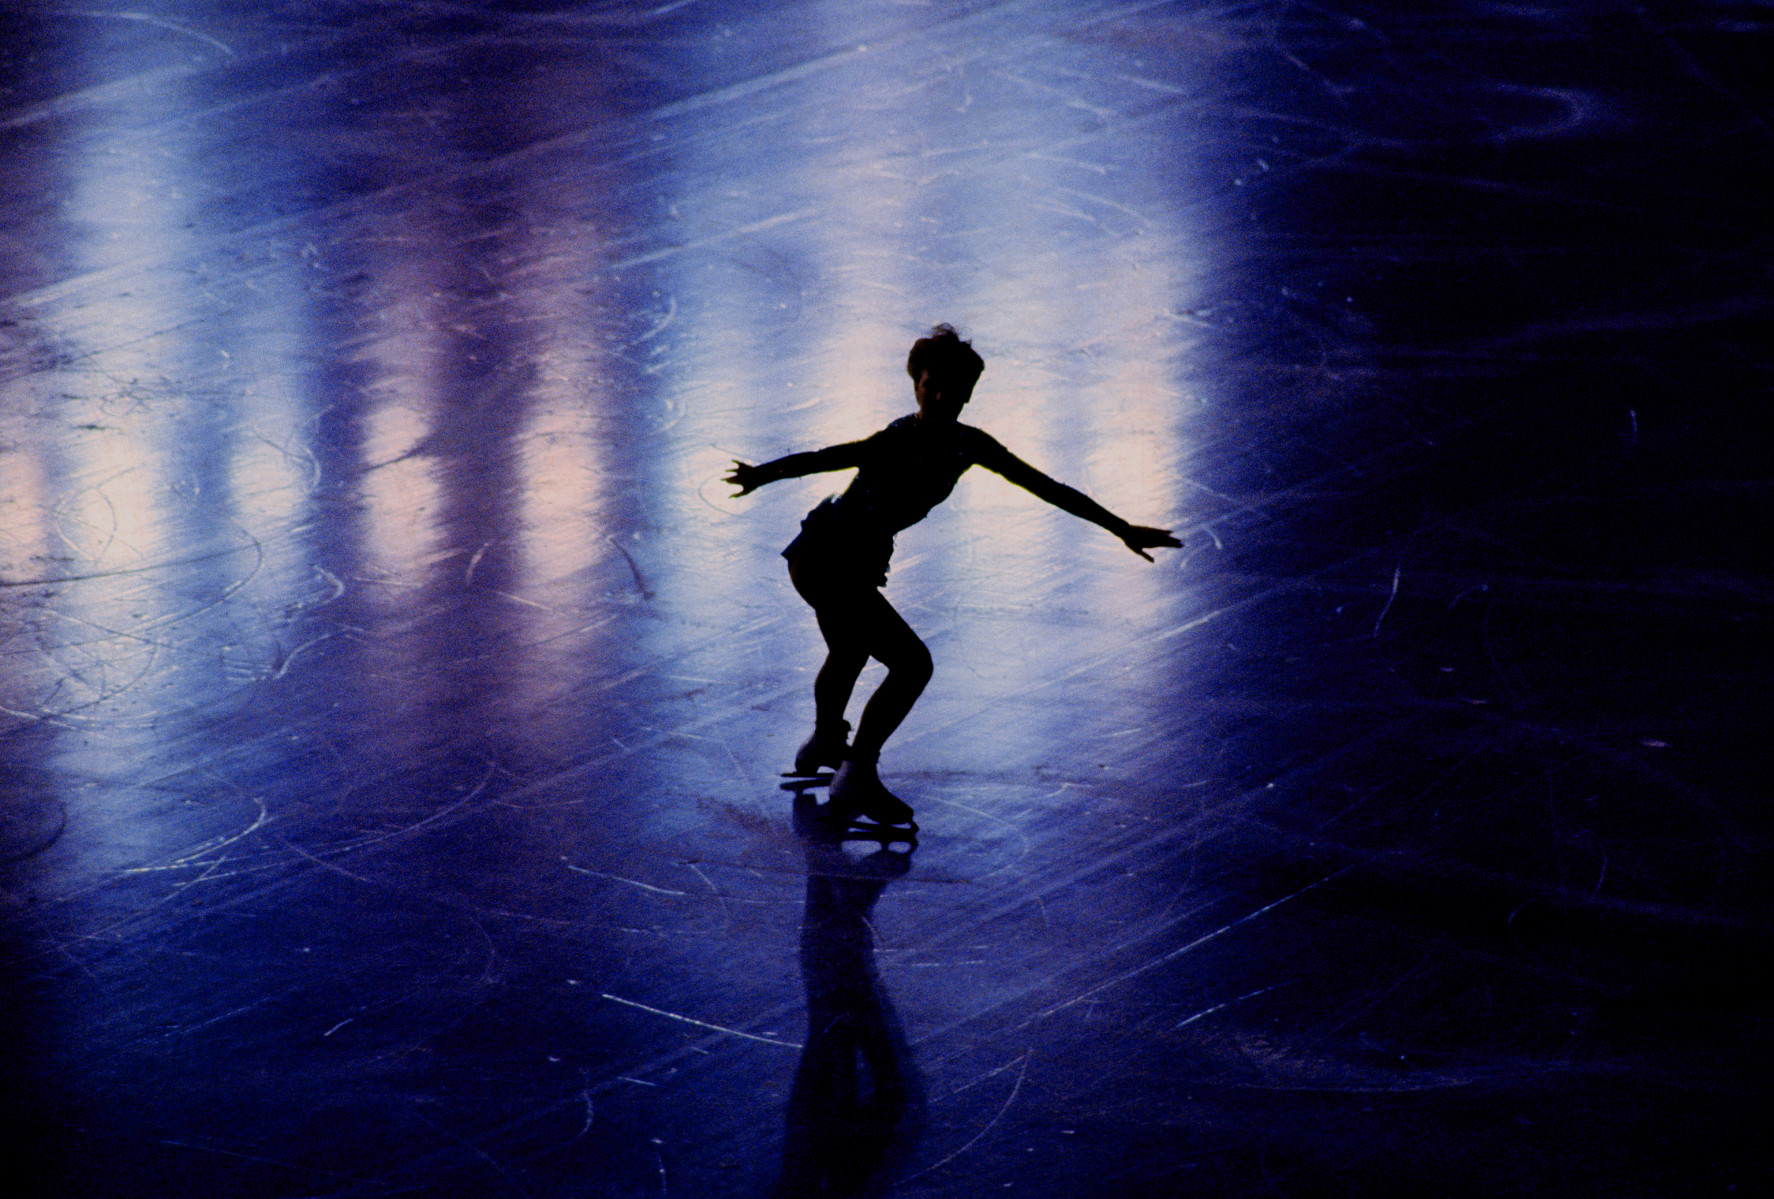 Figure Skating, Tokyo : Sports : Photography by Adam Stoltman: Sports Photography, The Arts, Portraiture, Travel, Photojournalism and Fine Art in New York